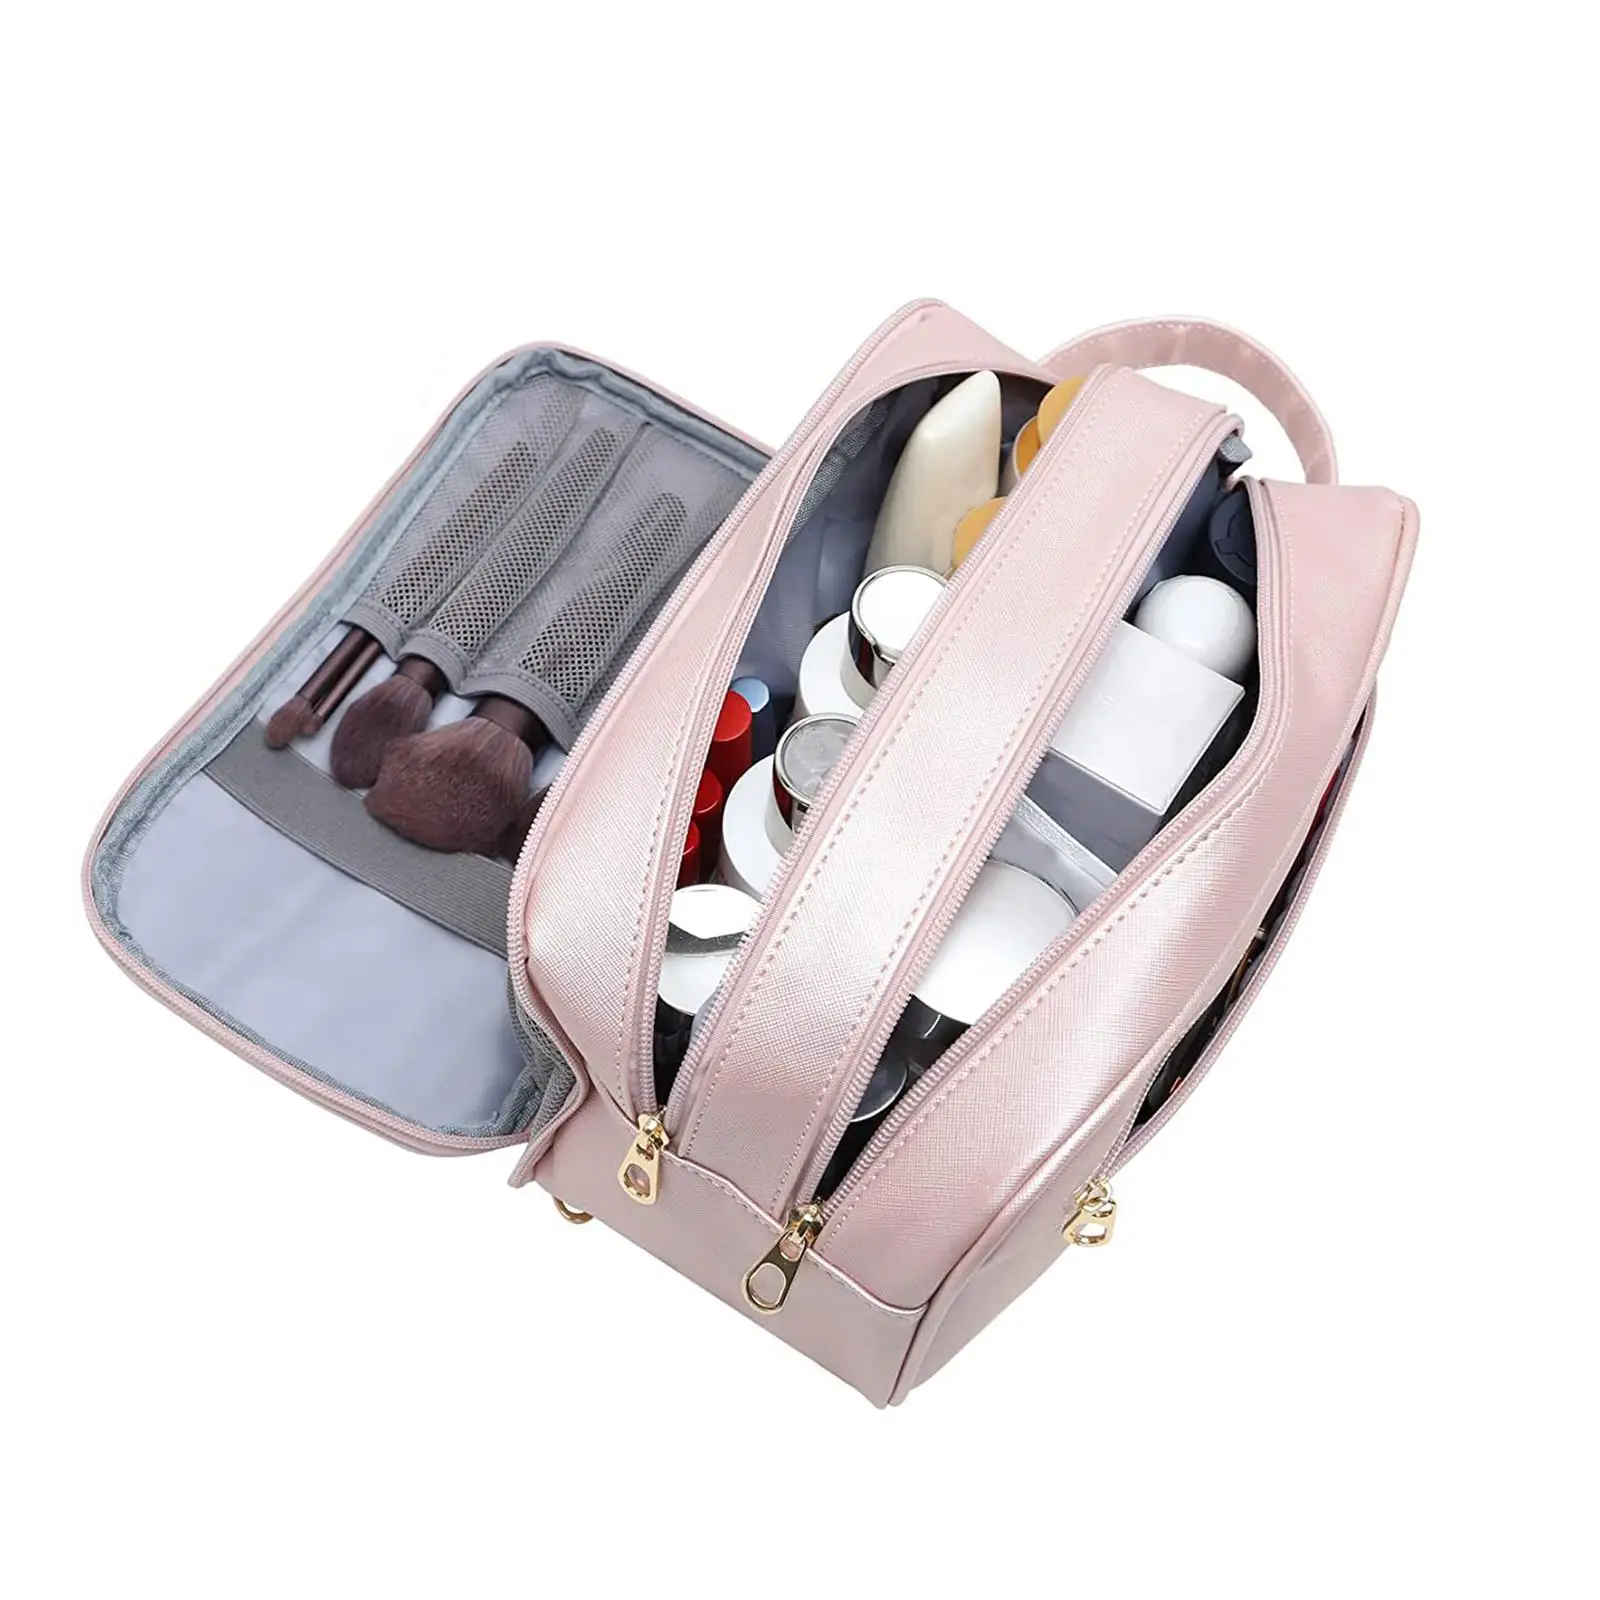 Portable PU Leather Toiletry Bag Cosmetic Organizer Large Capacity Travel Makeup Bag for Accessories for Women Men Home Use Gym